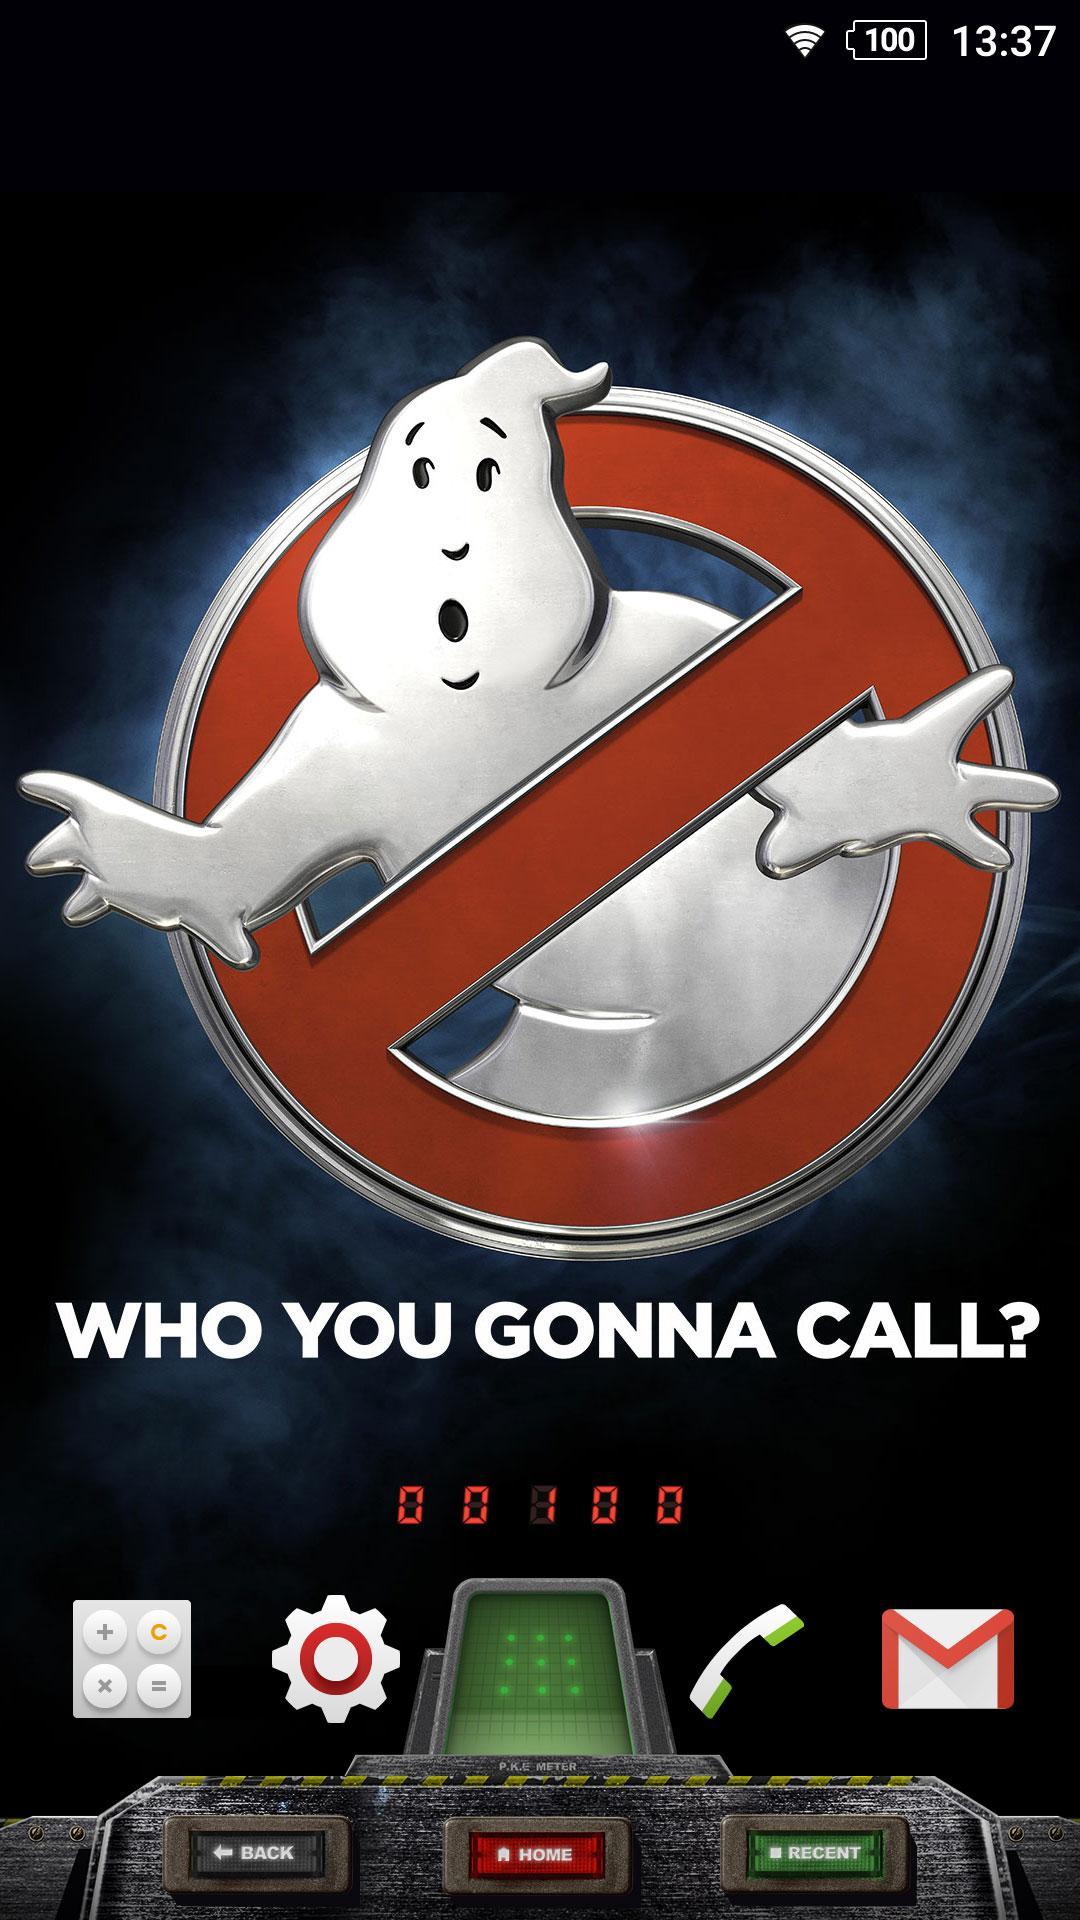 Android 用の Xperia Ghostbusters 16 Theme Apk をダウンロード